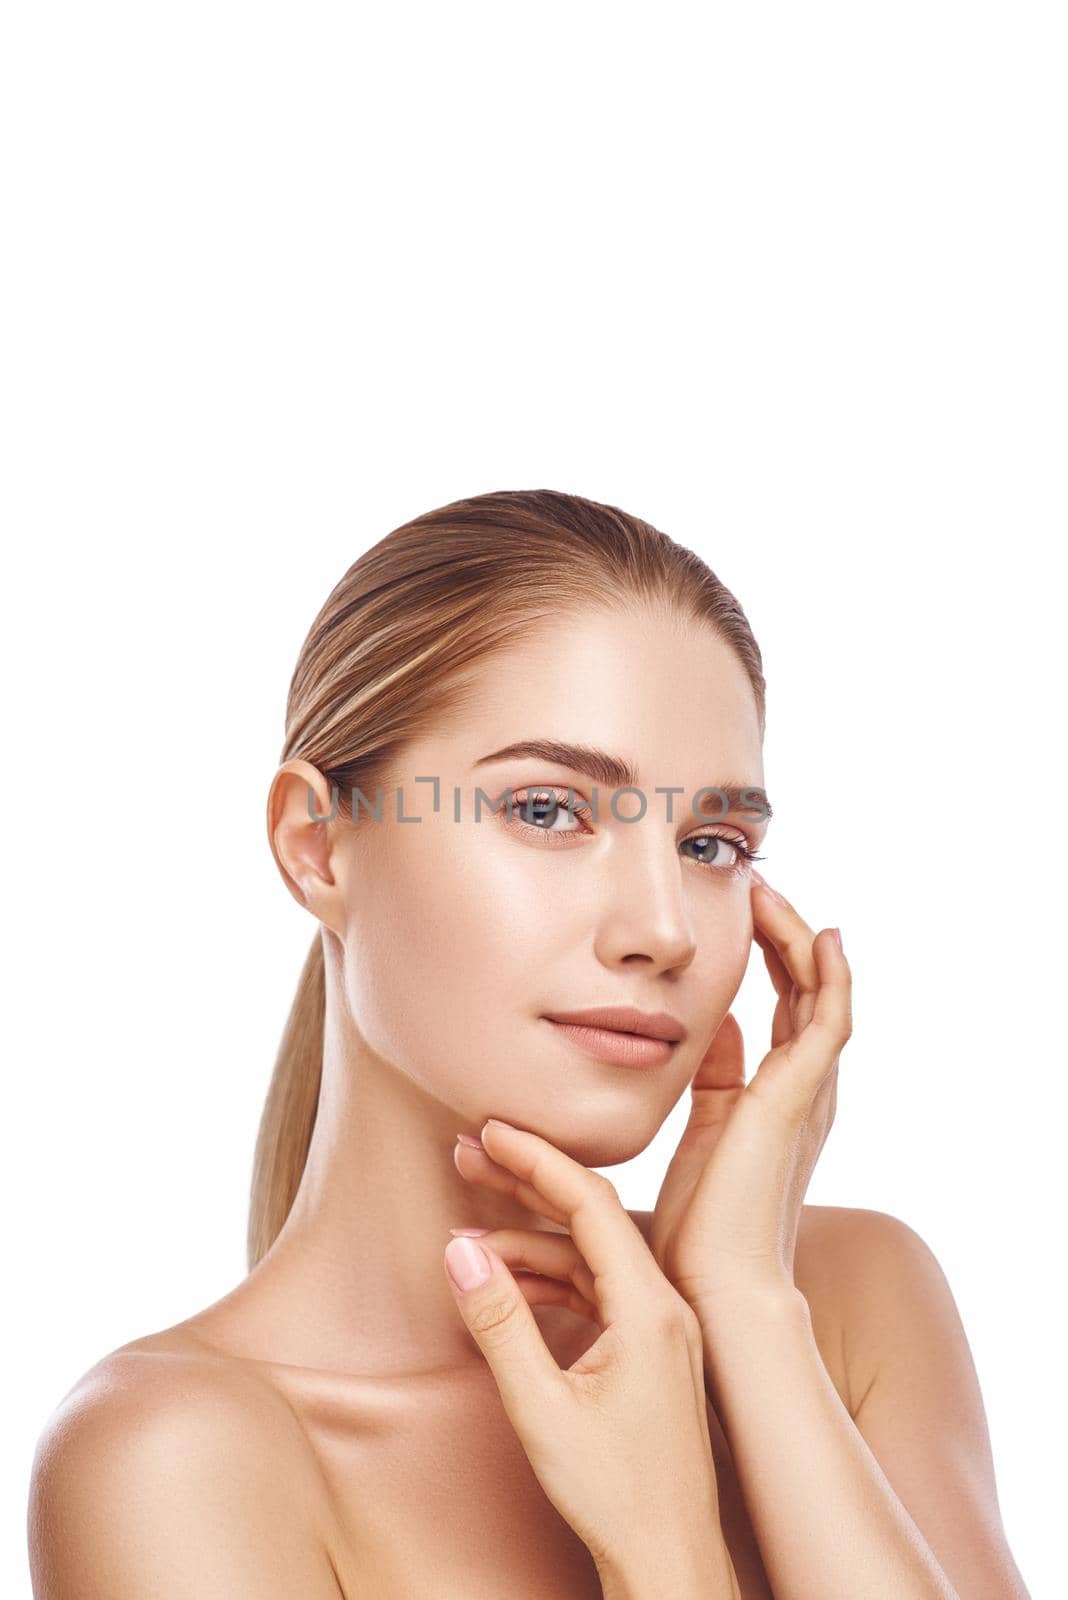 Beautiful woman face with hands close-up studio photo on white background. Light hair, grey eyes